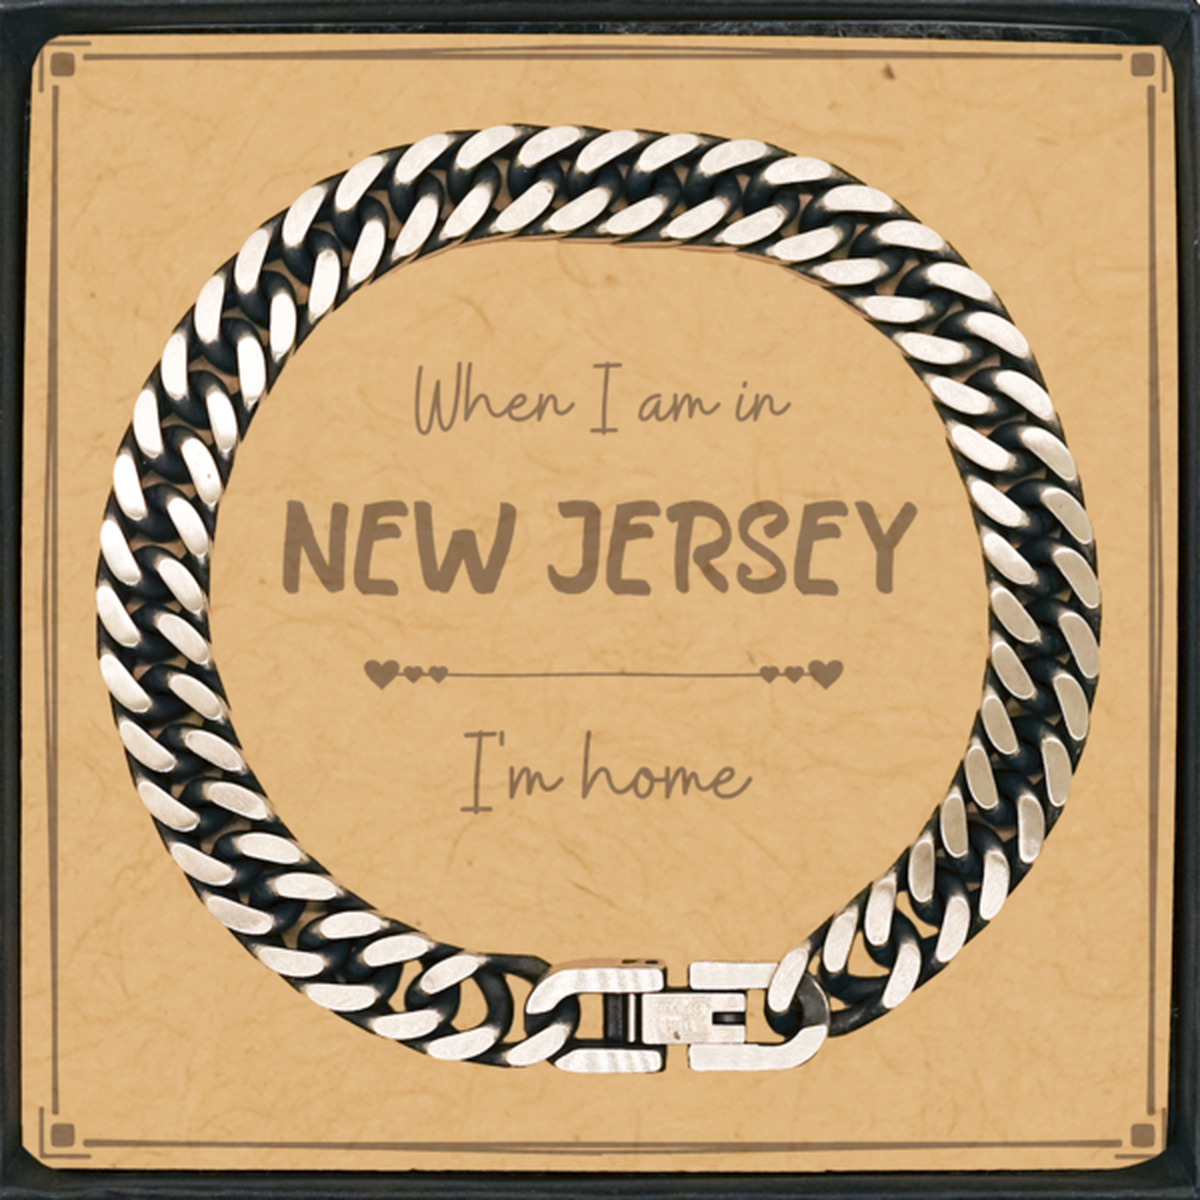 When I am in New Jersey I'm home Cuban Link Chain Bracelet, Message Card Gifts For New Jersey, State New Jersey Birthday Gifts for Friends Coworker